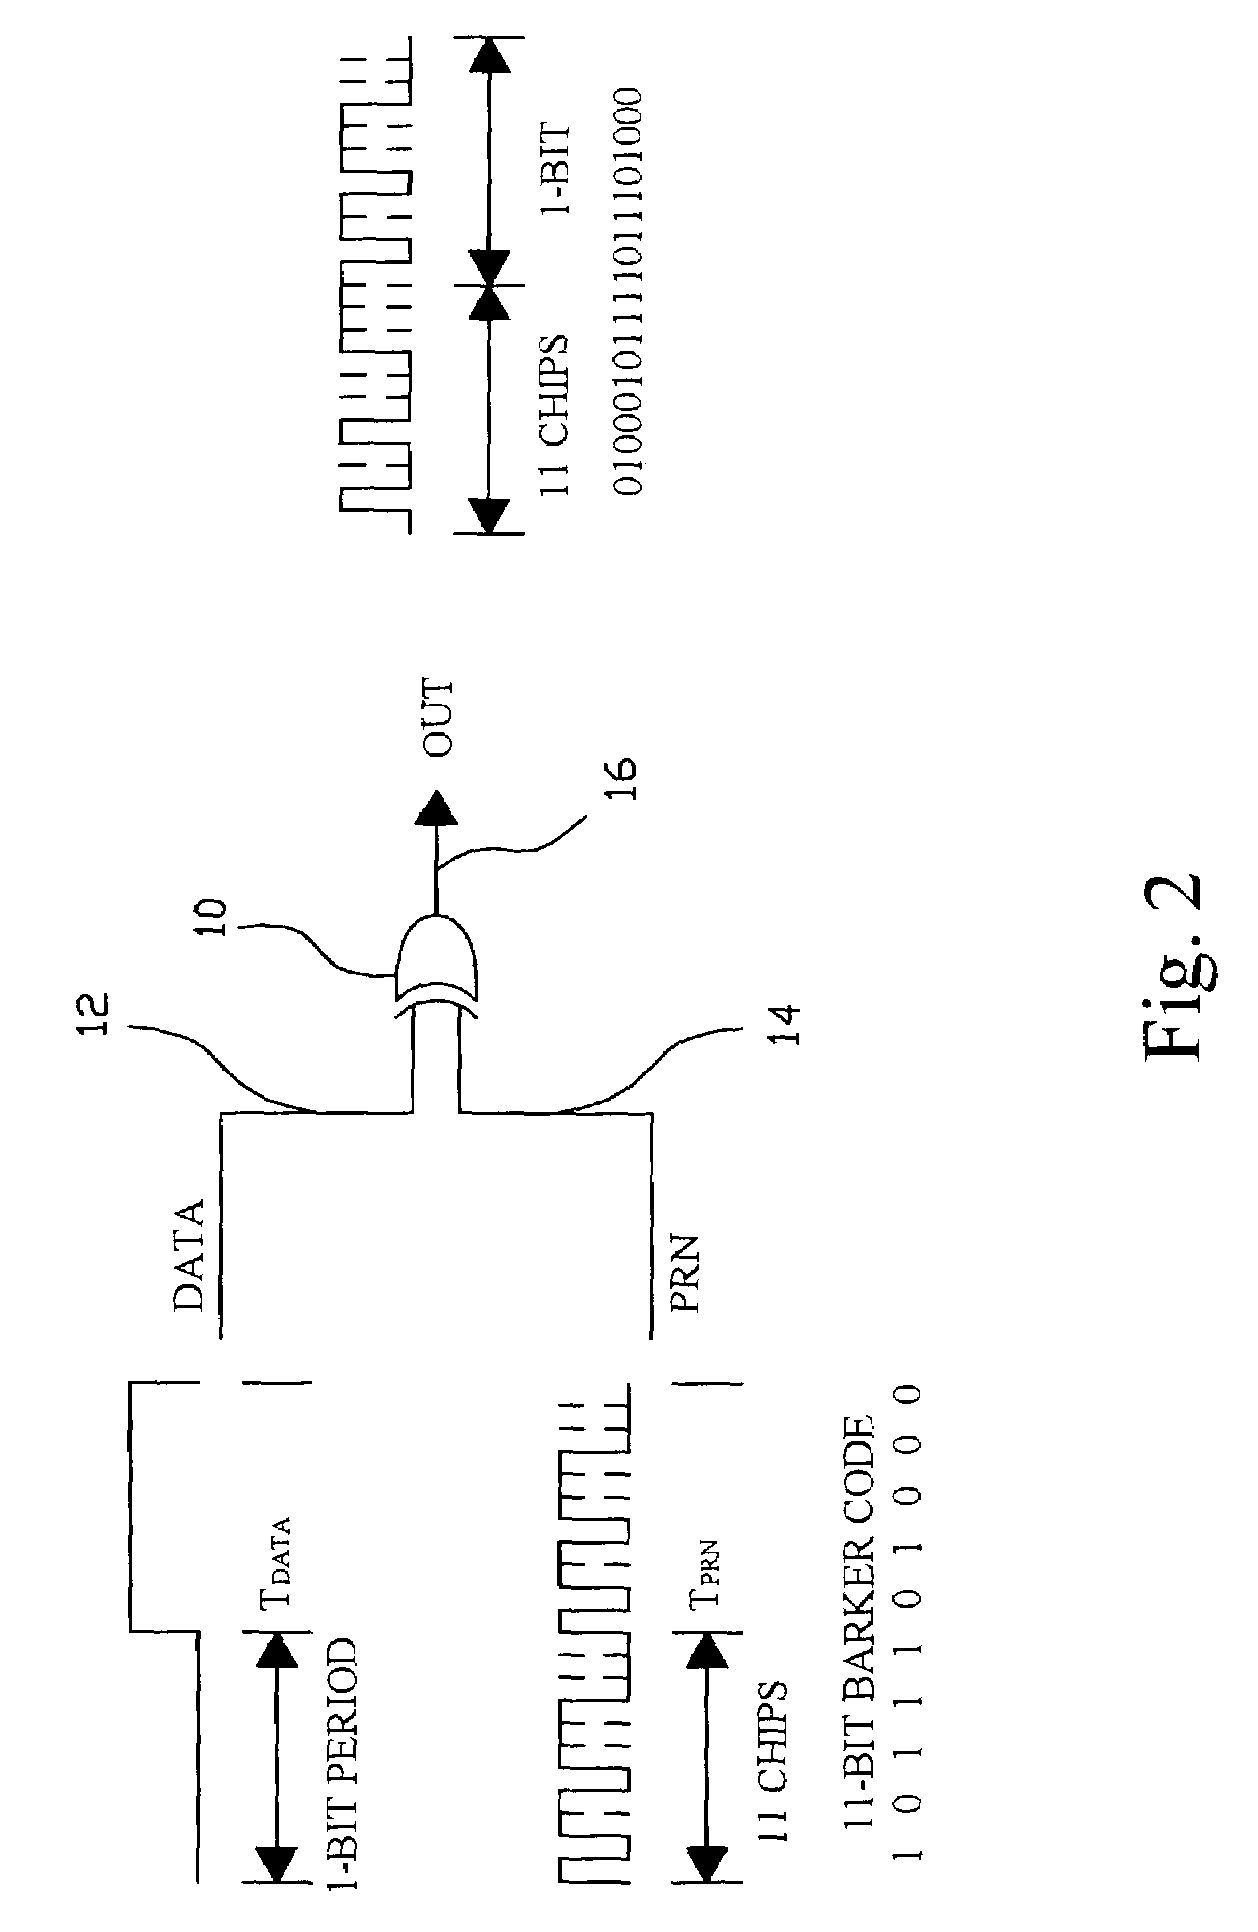 Carrier sensing, signal quality and link quality in a receiver